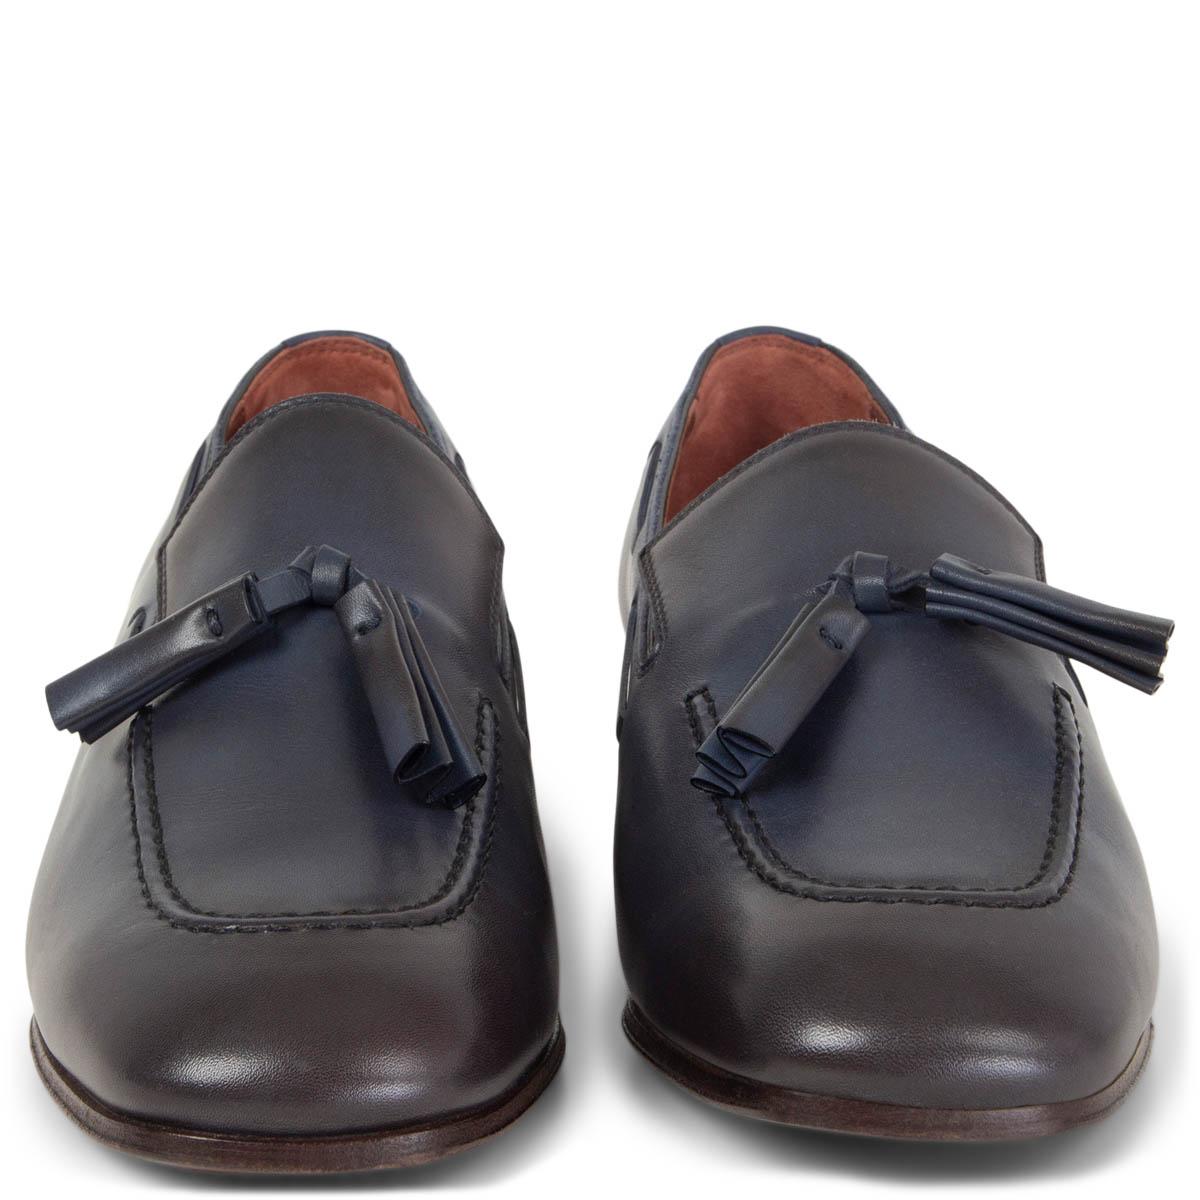 100% authentic Loroa Piana tassel loafers in midnight blue burnished calfskin with a square toe and stacked heel. Have been worn once and are in virtually new condition. 

Measurements
Imprinted Size	36
Shoe Size	36
Inside Sole	23cm (9in)
Width	7cm